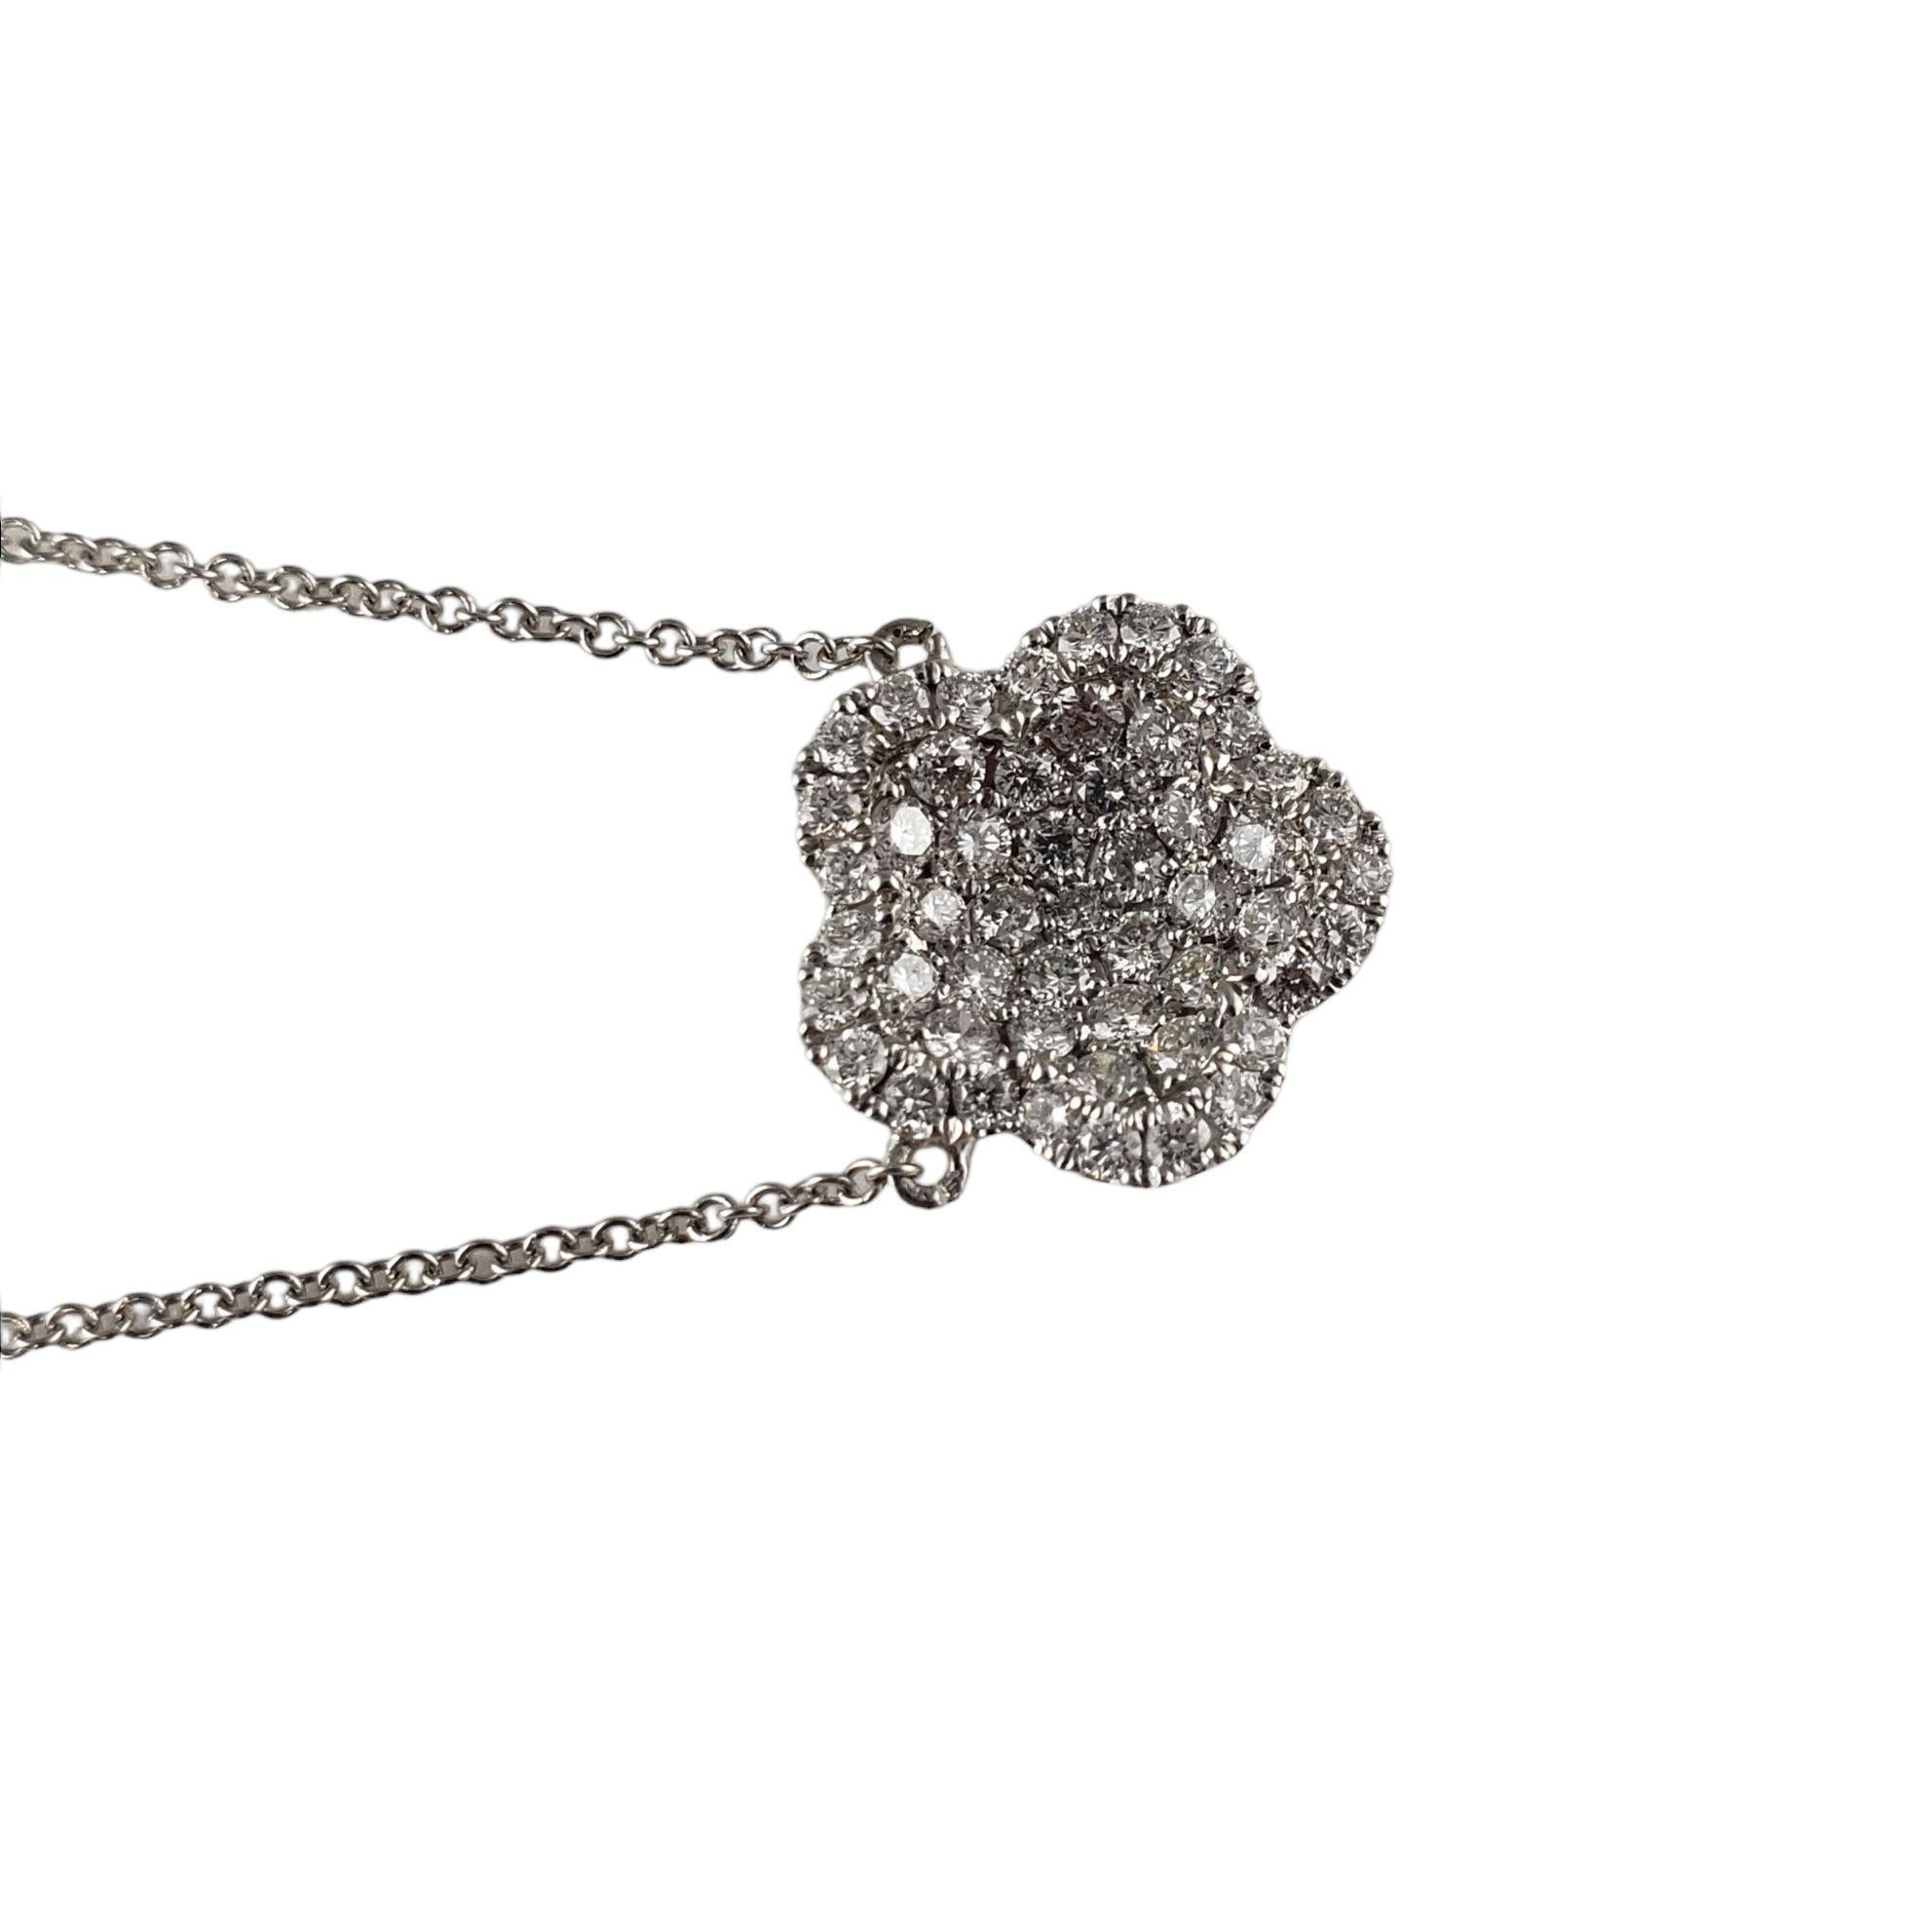 Vintage 18 Karat White Gold Diamond Flower Necklace JAGi Certified-

This stunning necklace features a sparkling flower (13 mm) decorated with 51 round brilliant cut diamonds set in classic 18K white gold.

Total diamond weight: .53 ct.

Diamond